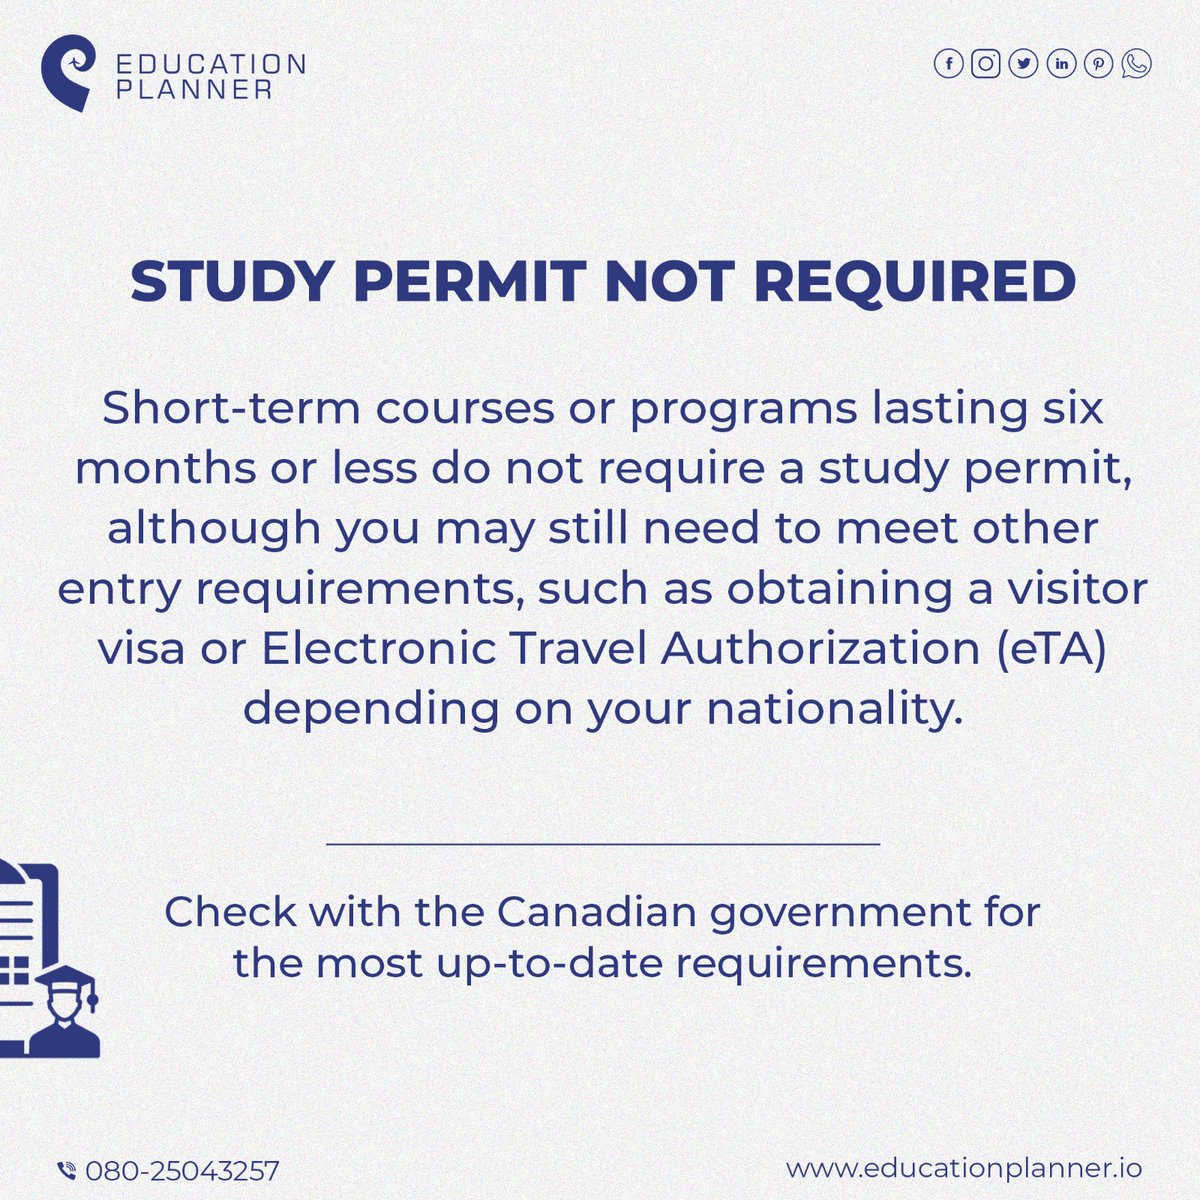 Do all cousres in Canada require a study permit? Check this to know more

Follow @educationplanner.io for more

📲 080-25043257

📩 educationplanner@gmail.com

💻 educationplanner.io

#educationplanner #studypermit #canadastudypermit #coursesincanada #canadacourses